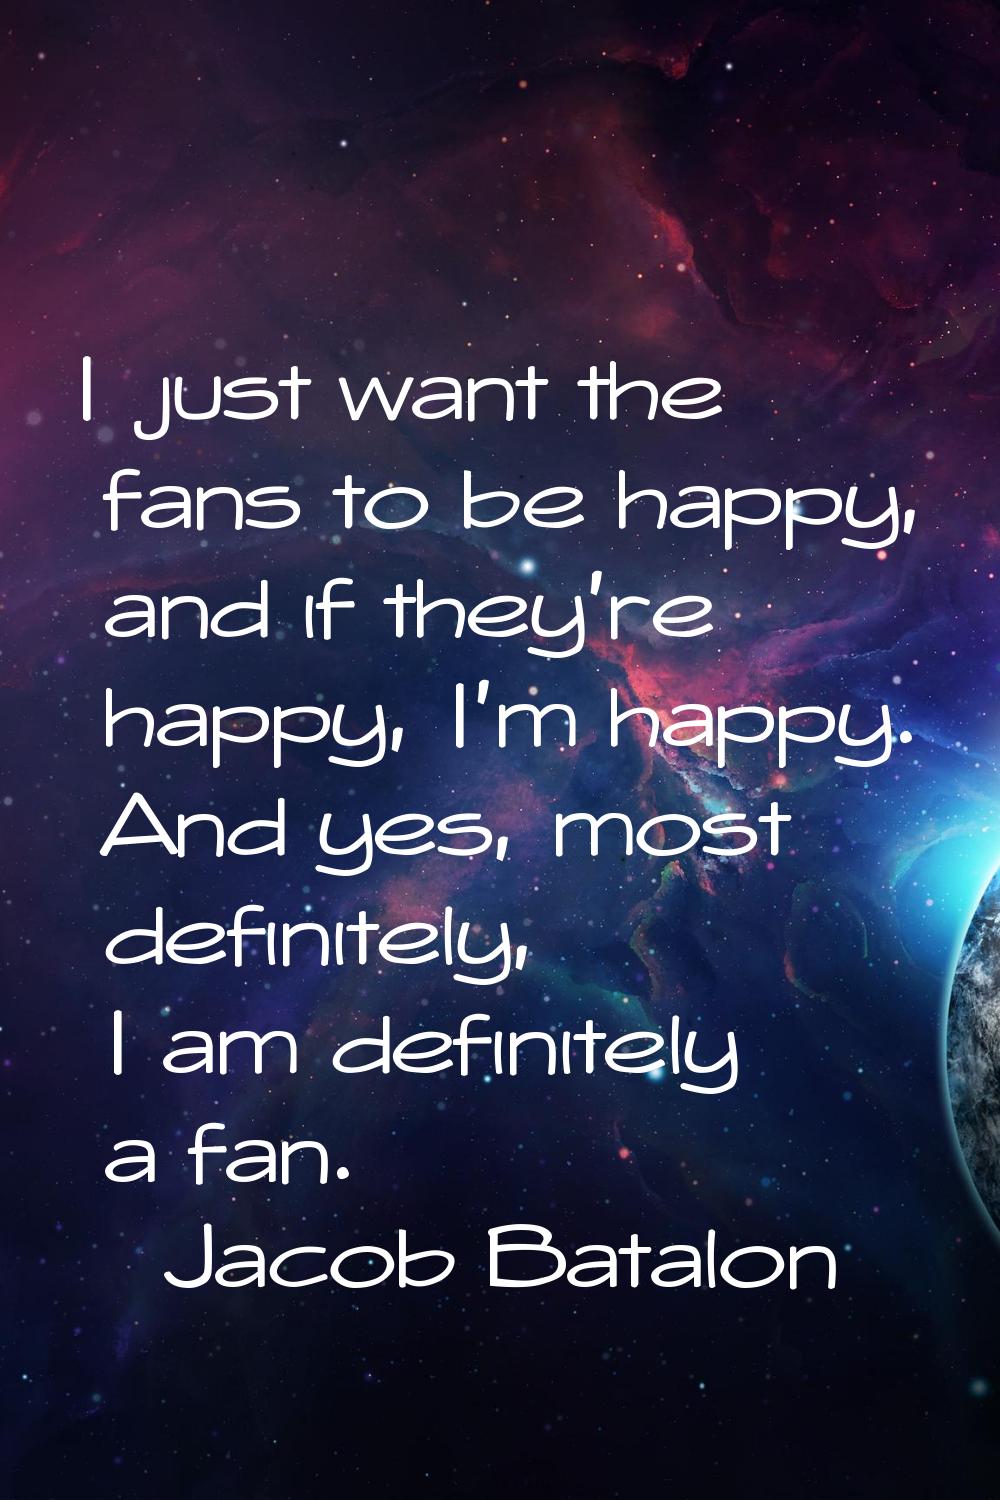 I just want the fans to be happy, and if they're happy, I'm happy. And yes, most definitely, I am d